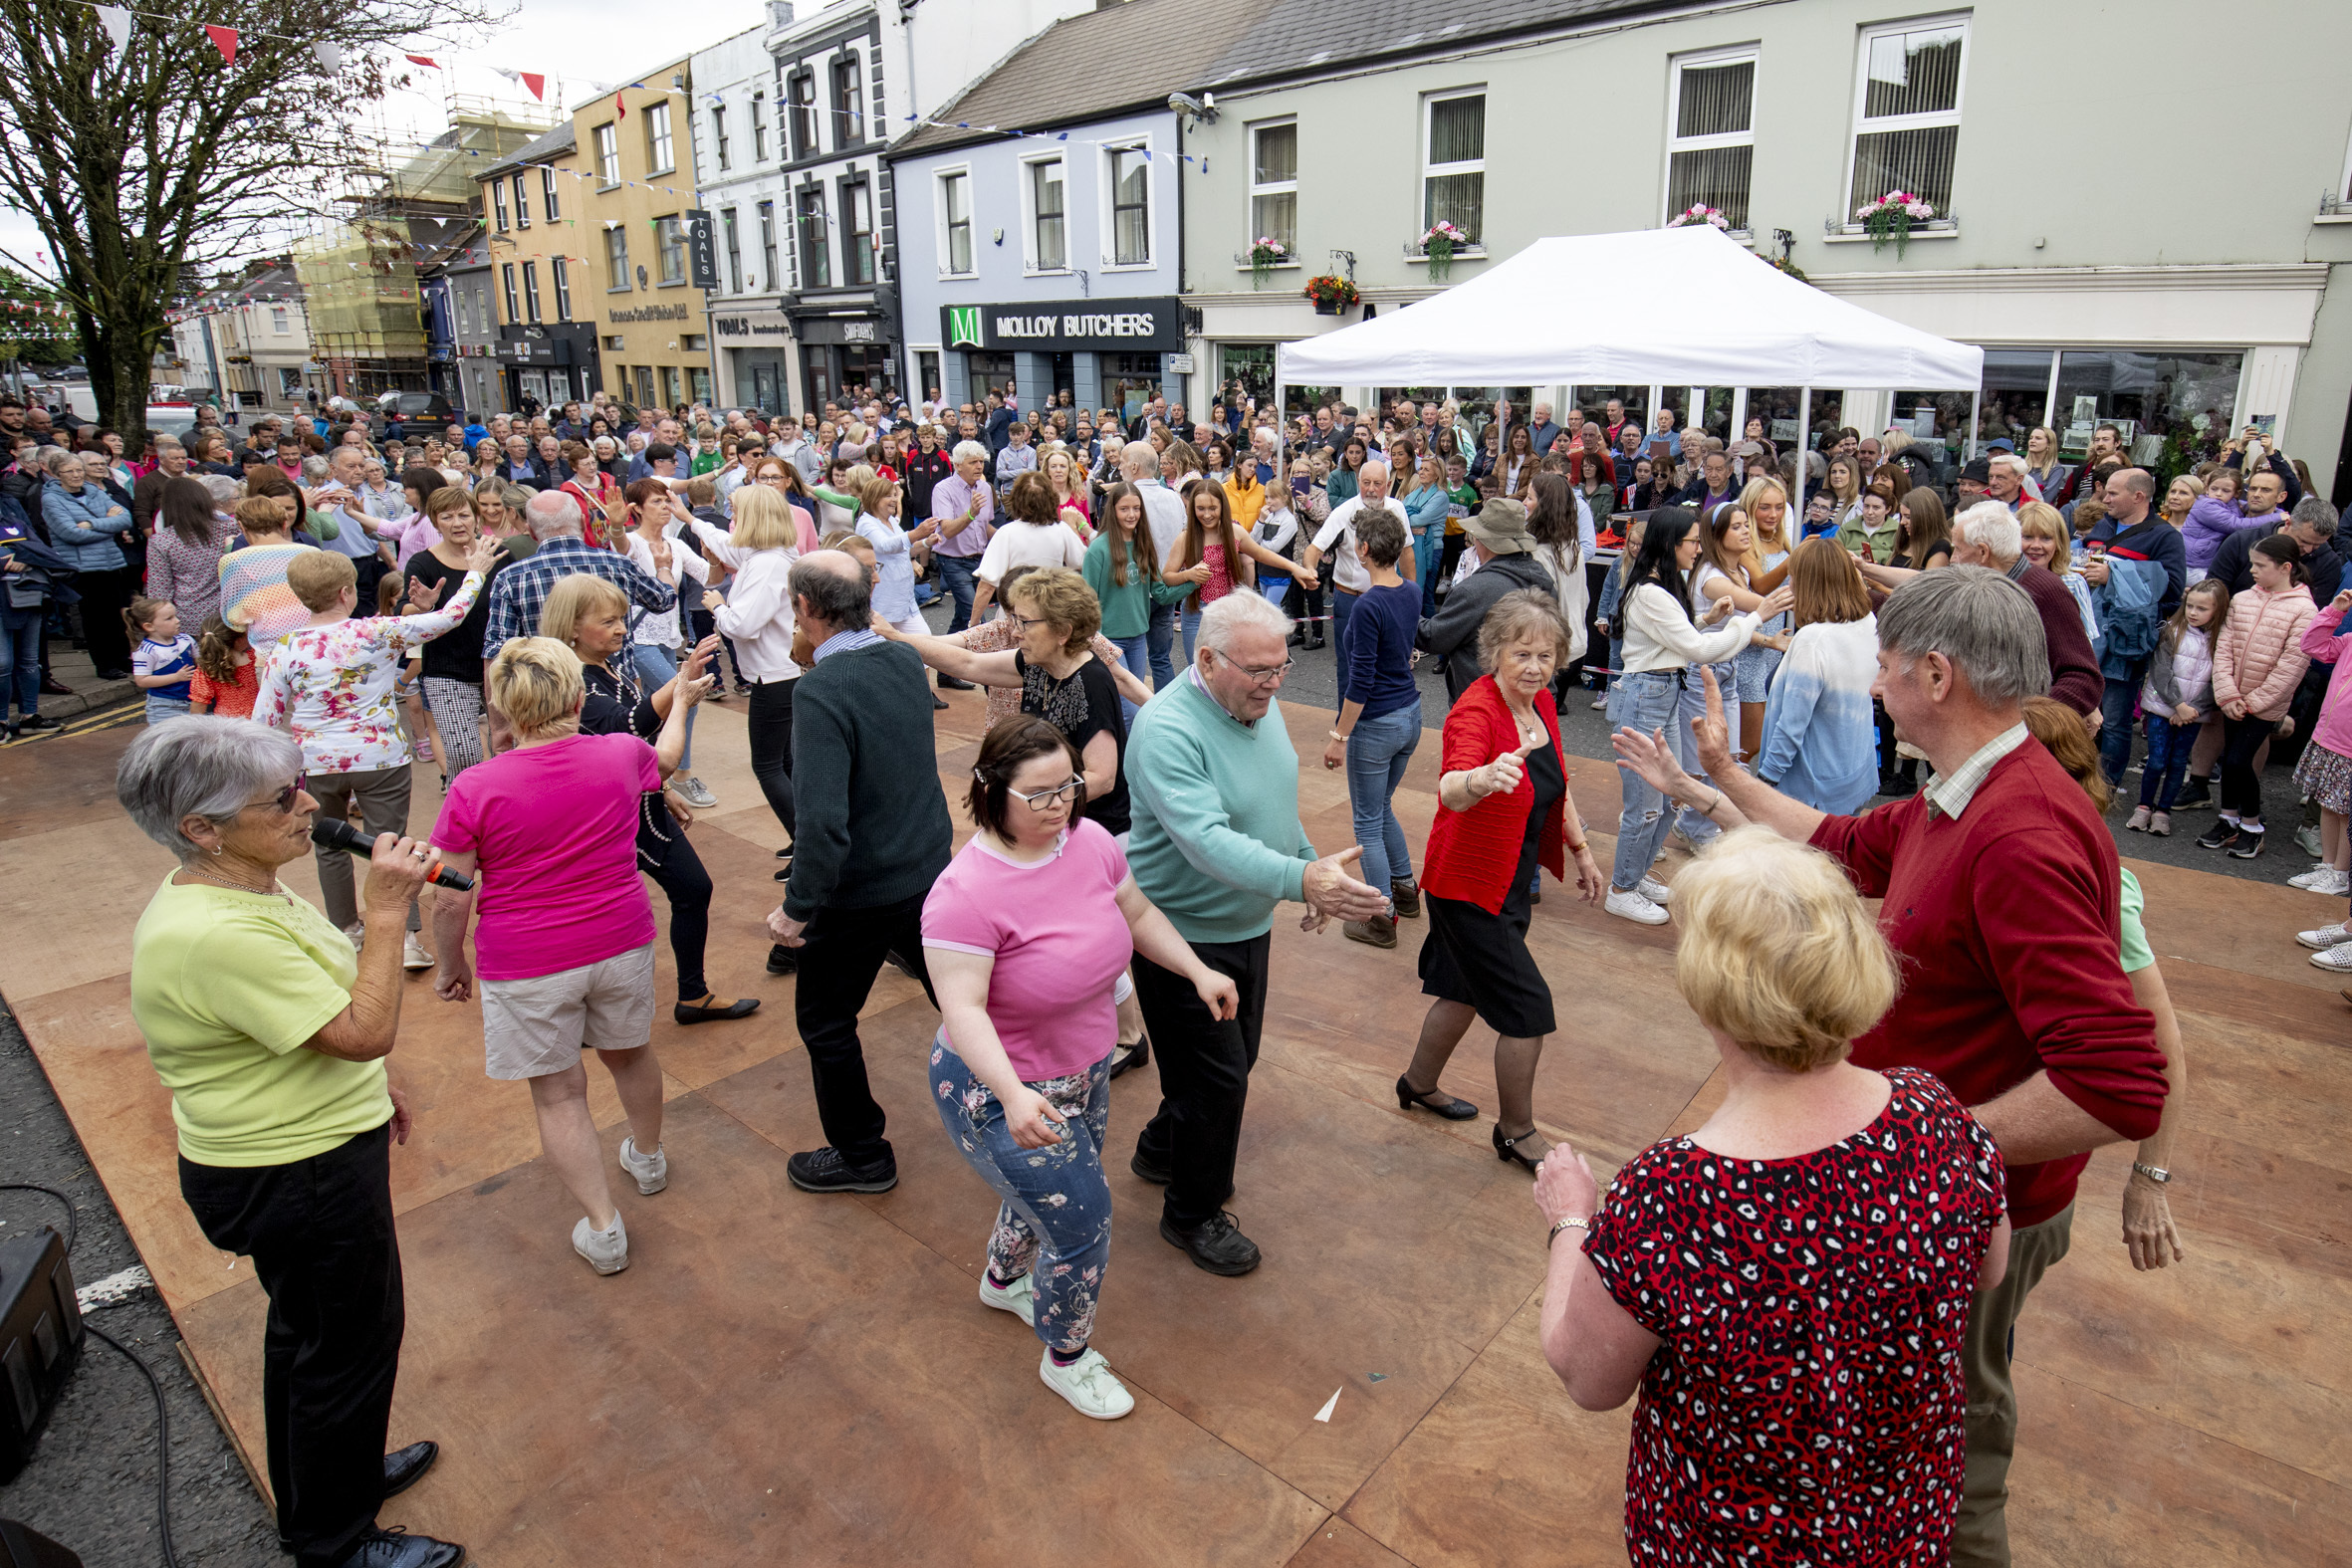 Céili dancing in the middle of Dromore village.